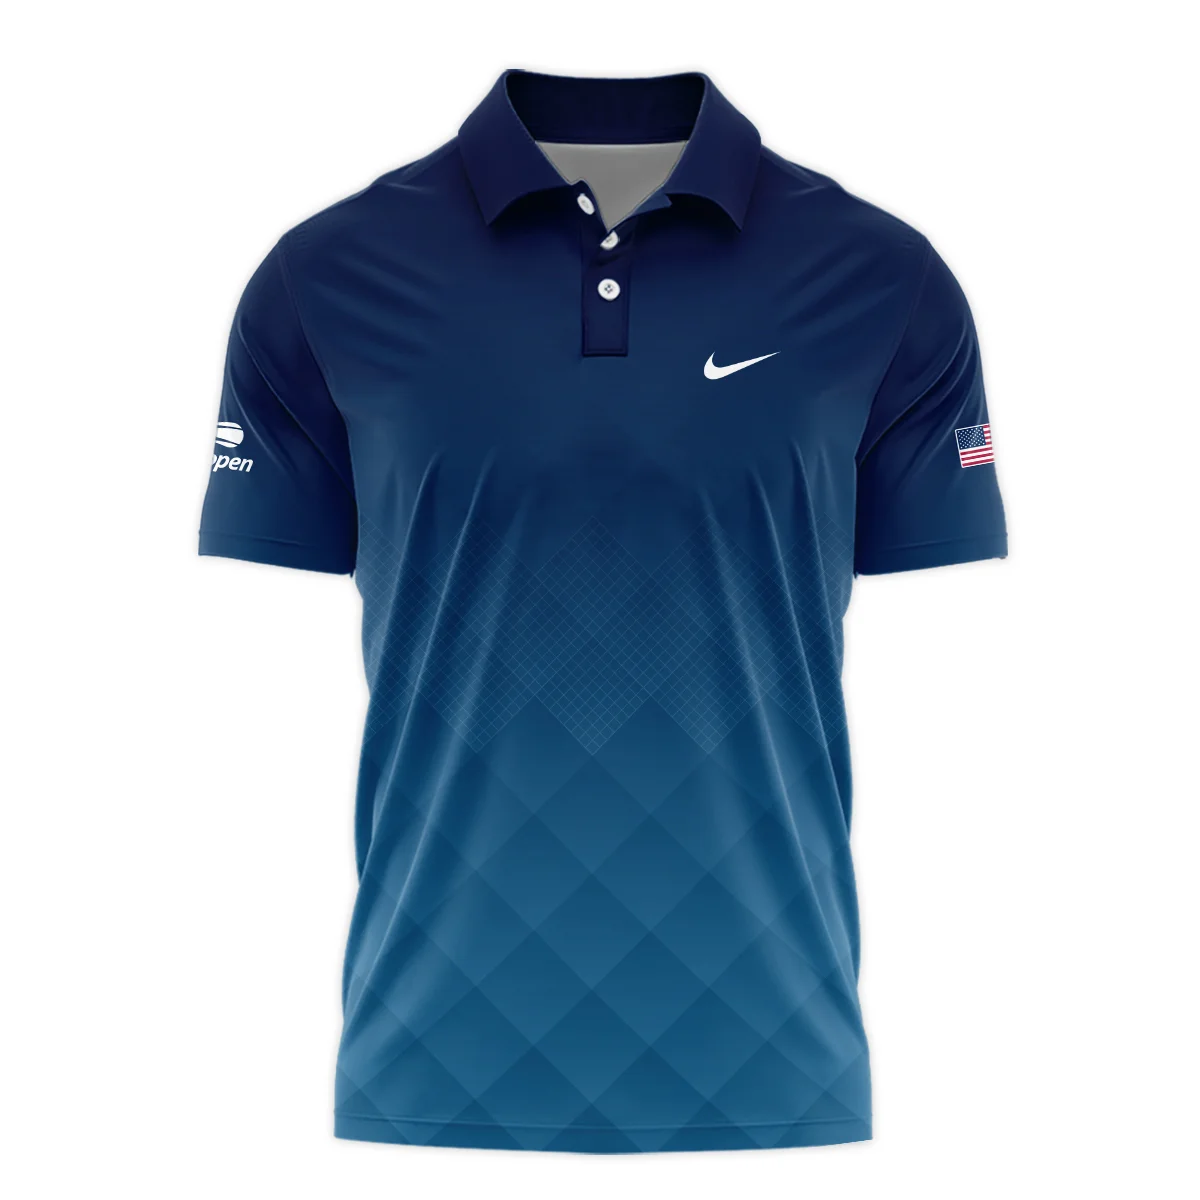 Nike Blue Abstract Background US Open Tennis Champions Zipper Polo Shirt Style Classic Zipper Polo Shirt For Men